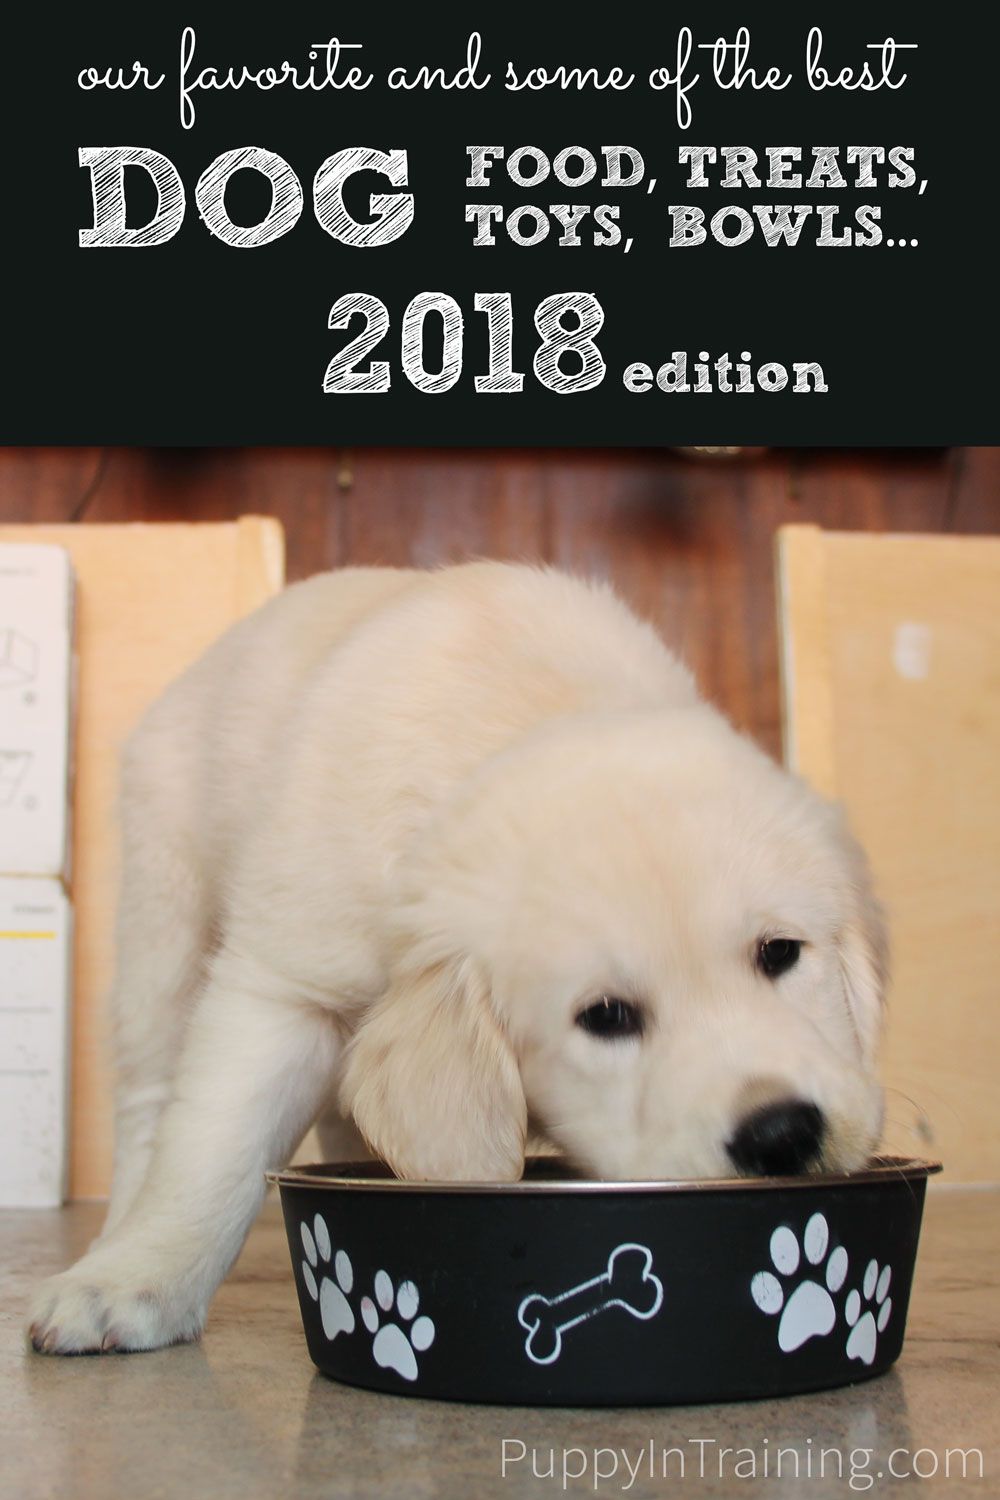 Best Dog Foods, Treats, Toys...2019 Edition